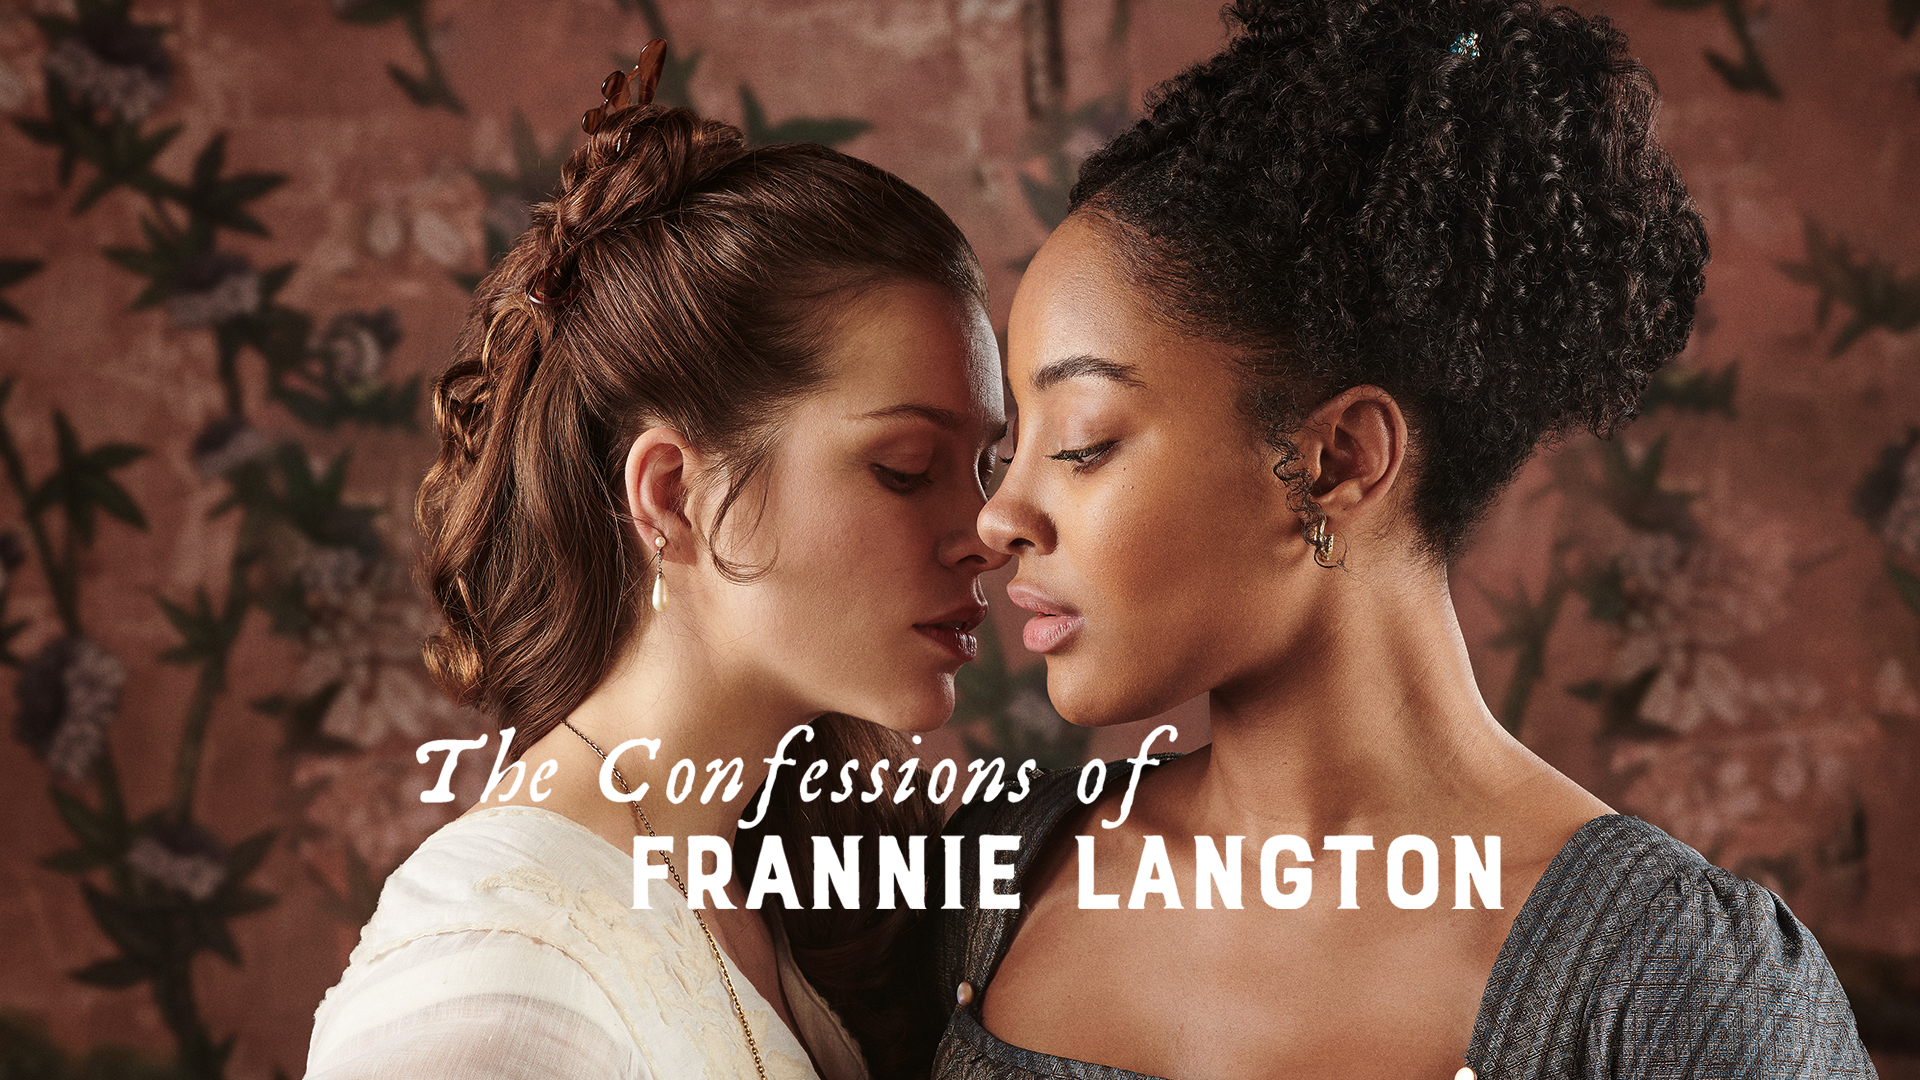 Jodhi May stars in ‘The Confessions of Frannie Langton’